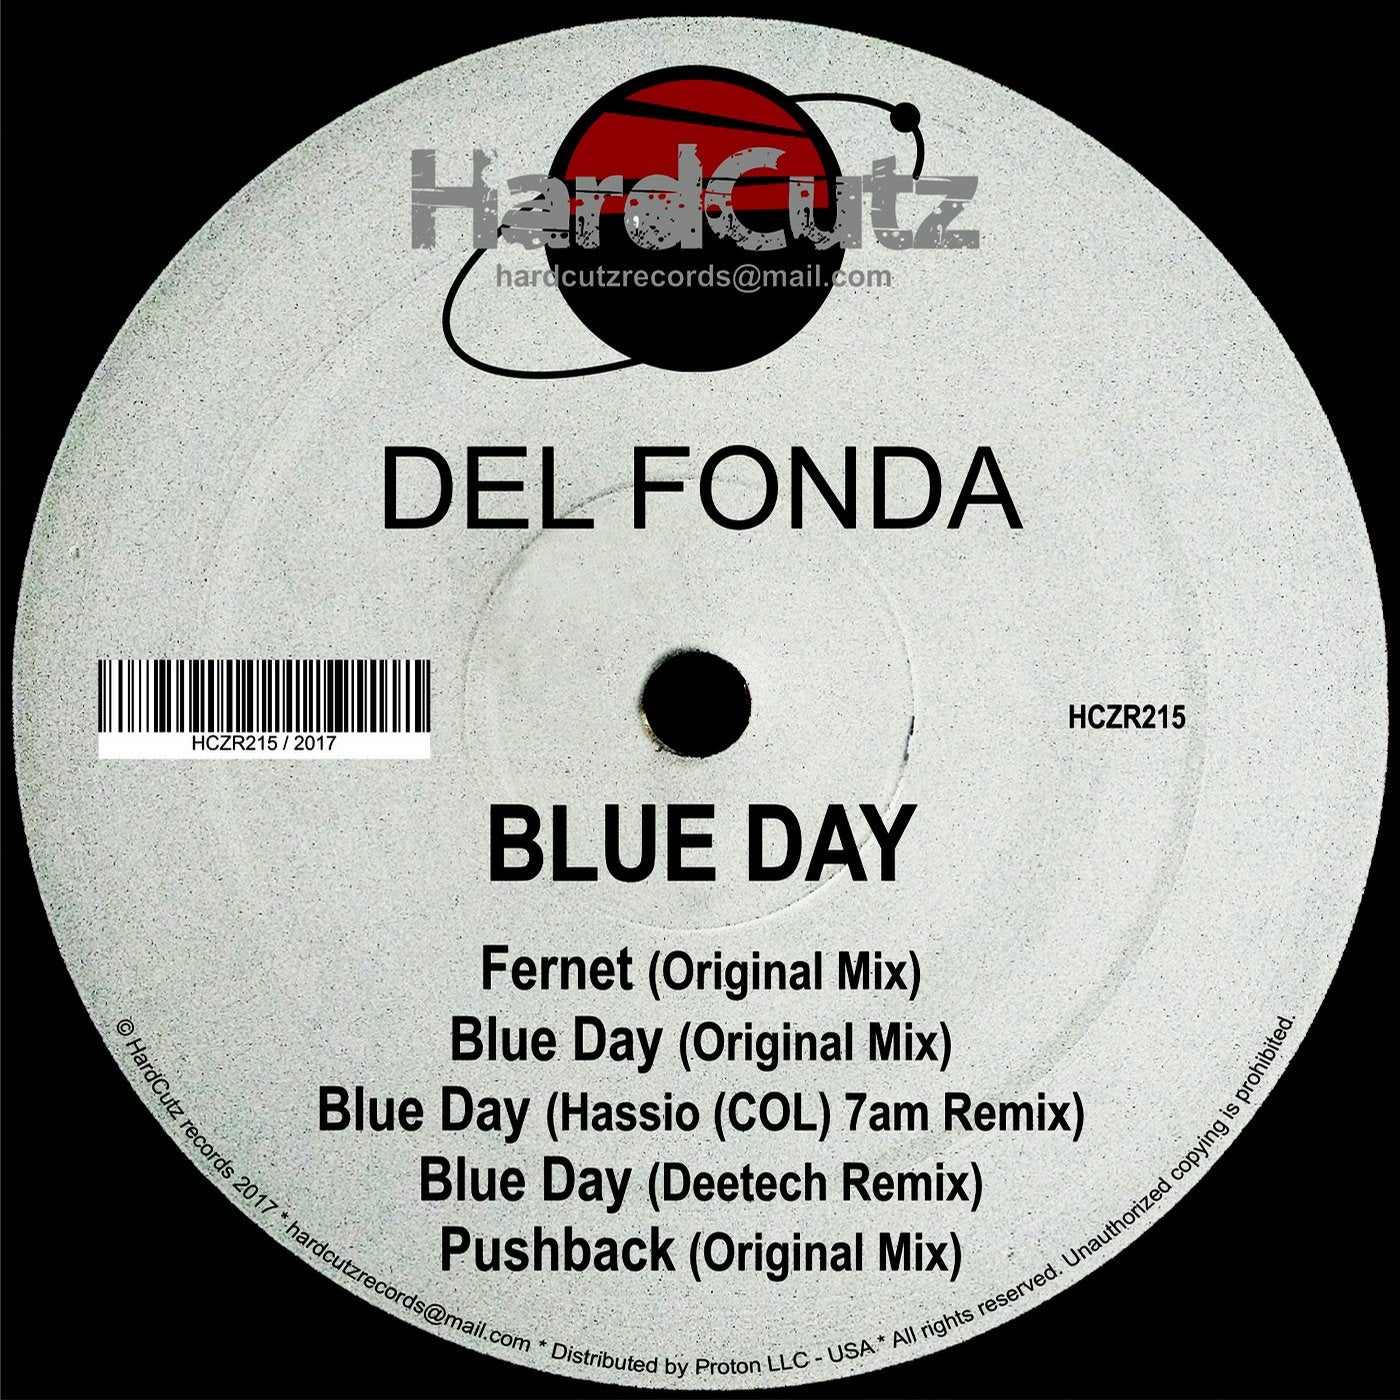 Blue Day